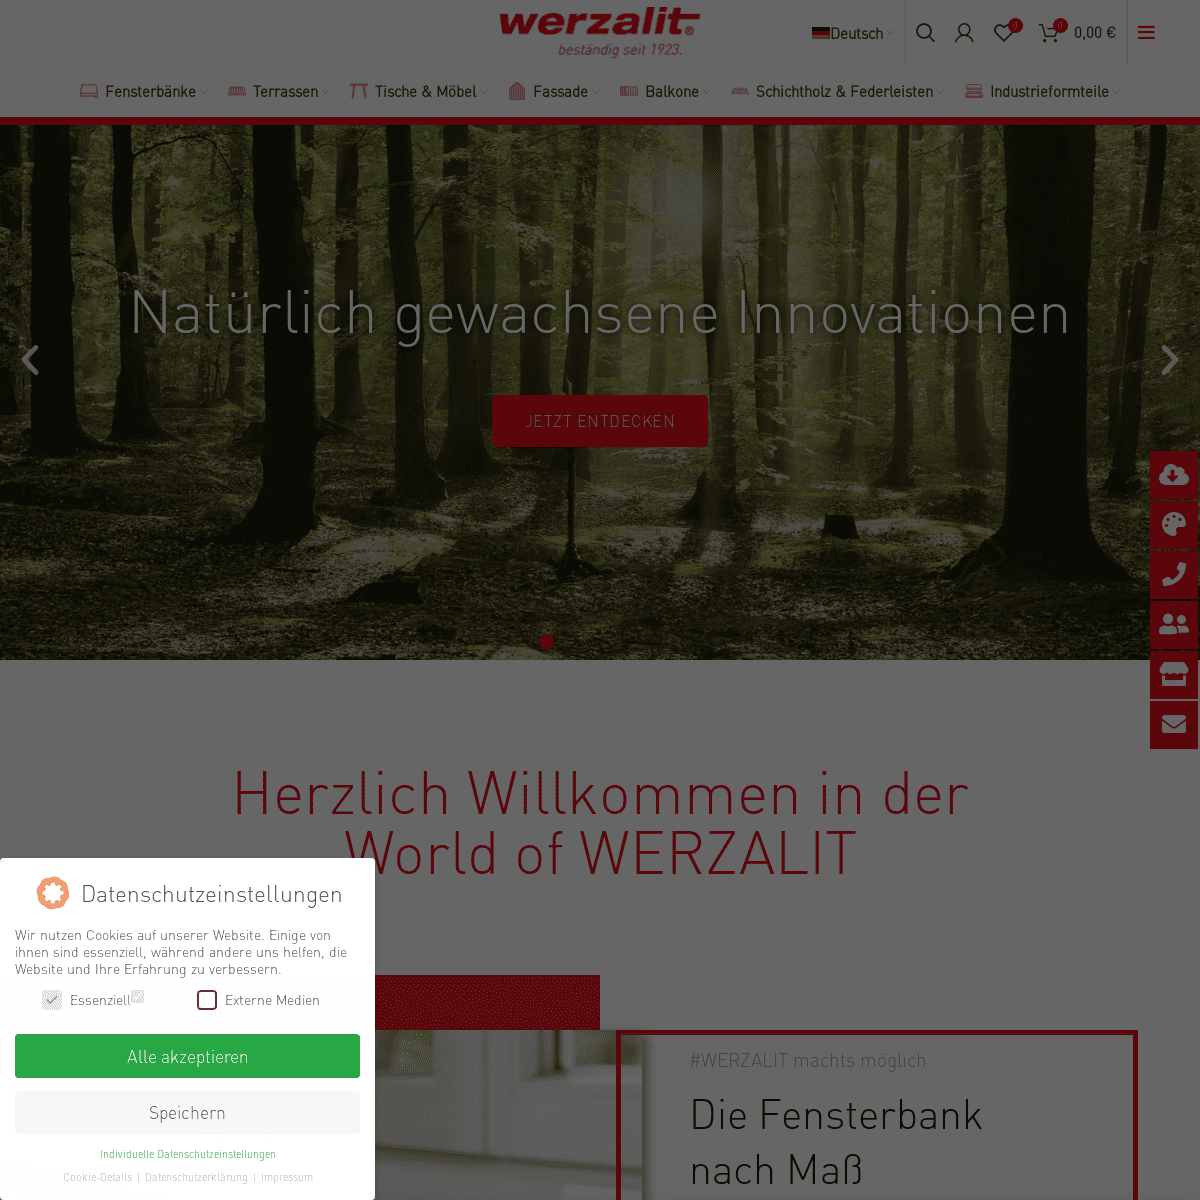 A complete backup of https://werzalit.com